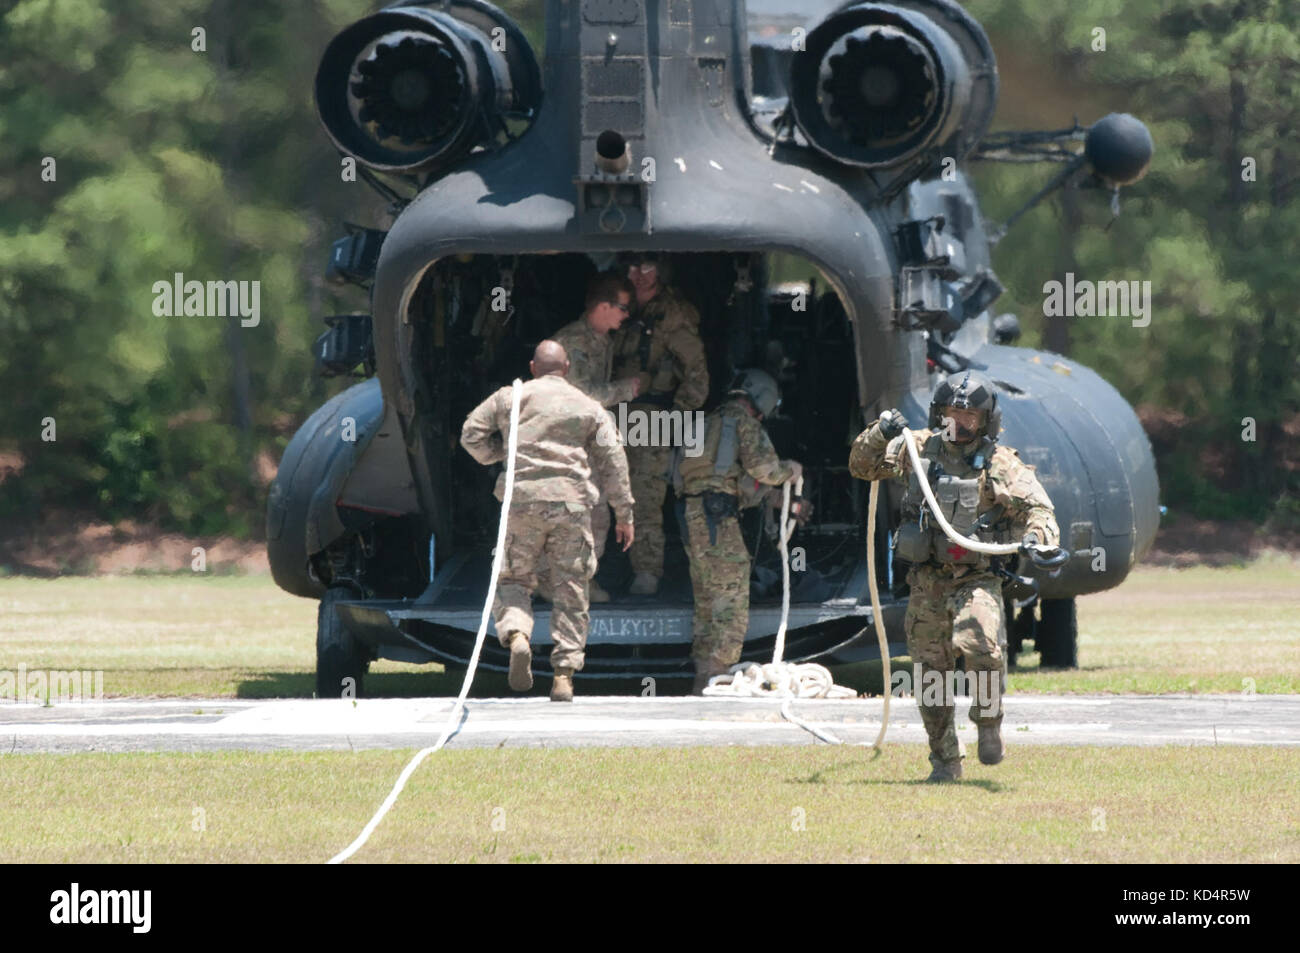 A U.S. Army crewmember assigned to the 160th Special Operations Aviation Regiment (Airborne) prepare for Special Insertion Exfiltration System training at McCrady Training Center, Eastover, S.C., May 17, 2014. The 160th SOAR (A) supported a joint mission with 7th Special Forces Group (Airborne), training over 100 South Carolina Army National Guard Soldiers assigned to 4th Battalion, 118th Infantry Regiment, 218th Maneuver Enhancement Brigade, during the SCARNG drill weekend. (U.S. Army National Guard photo by Sgt. 1st Class Kimberly D. Calkins/Released) Stock Photo